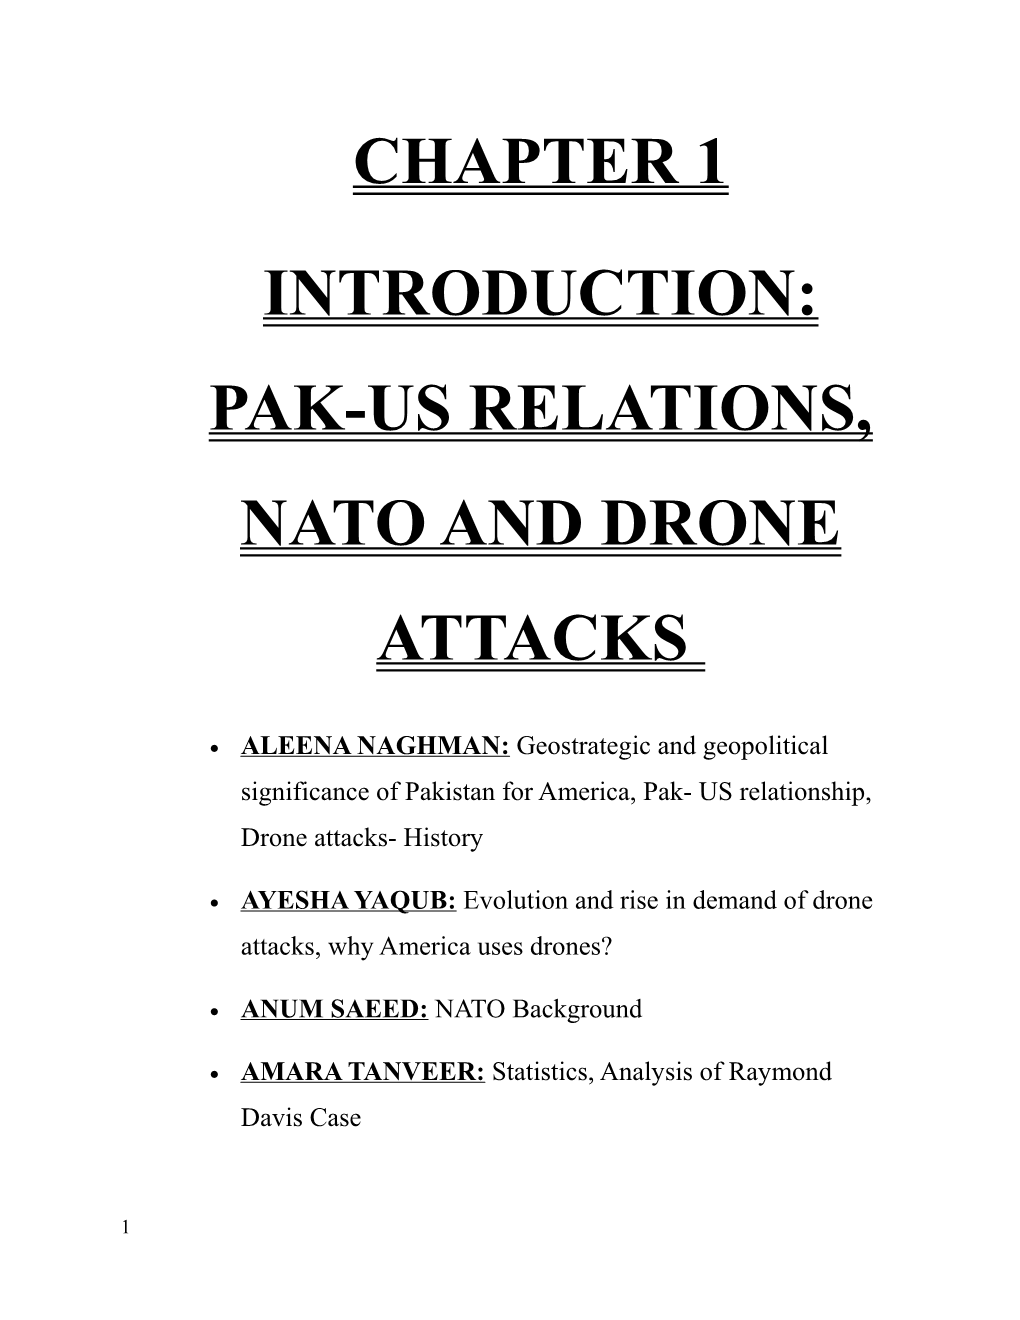 Introduction: Pak-Us Relations, Nato and Drone Attacks